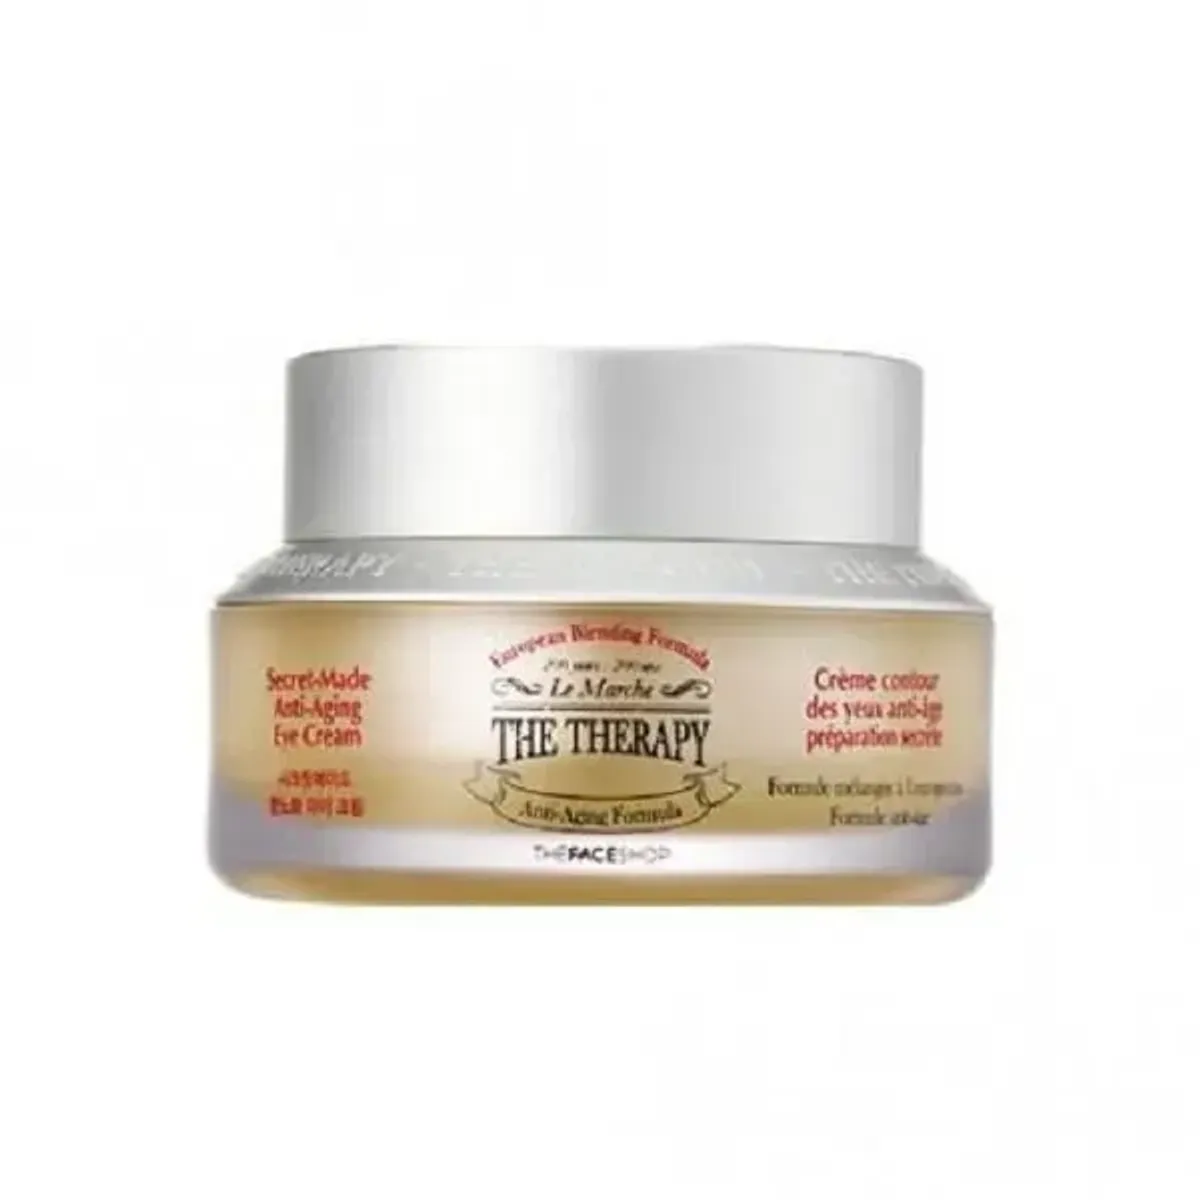 the-therapy-secret-made-anti-aging-eye-cream-1-1